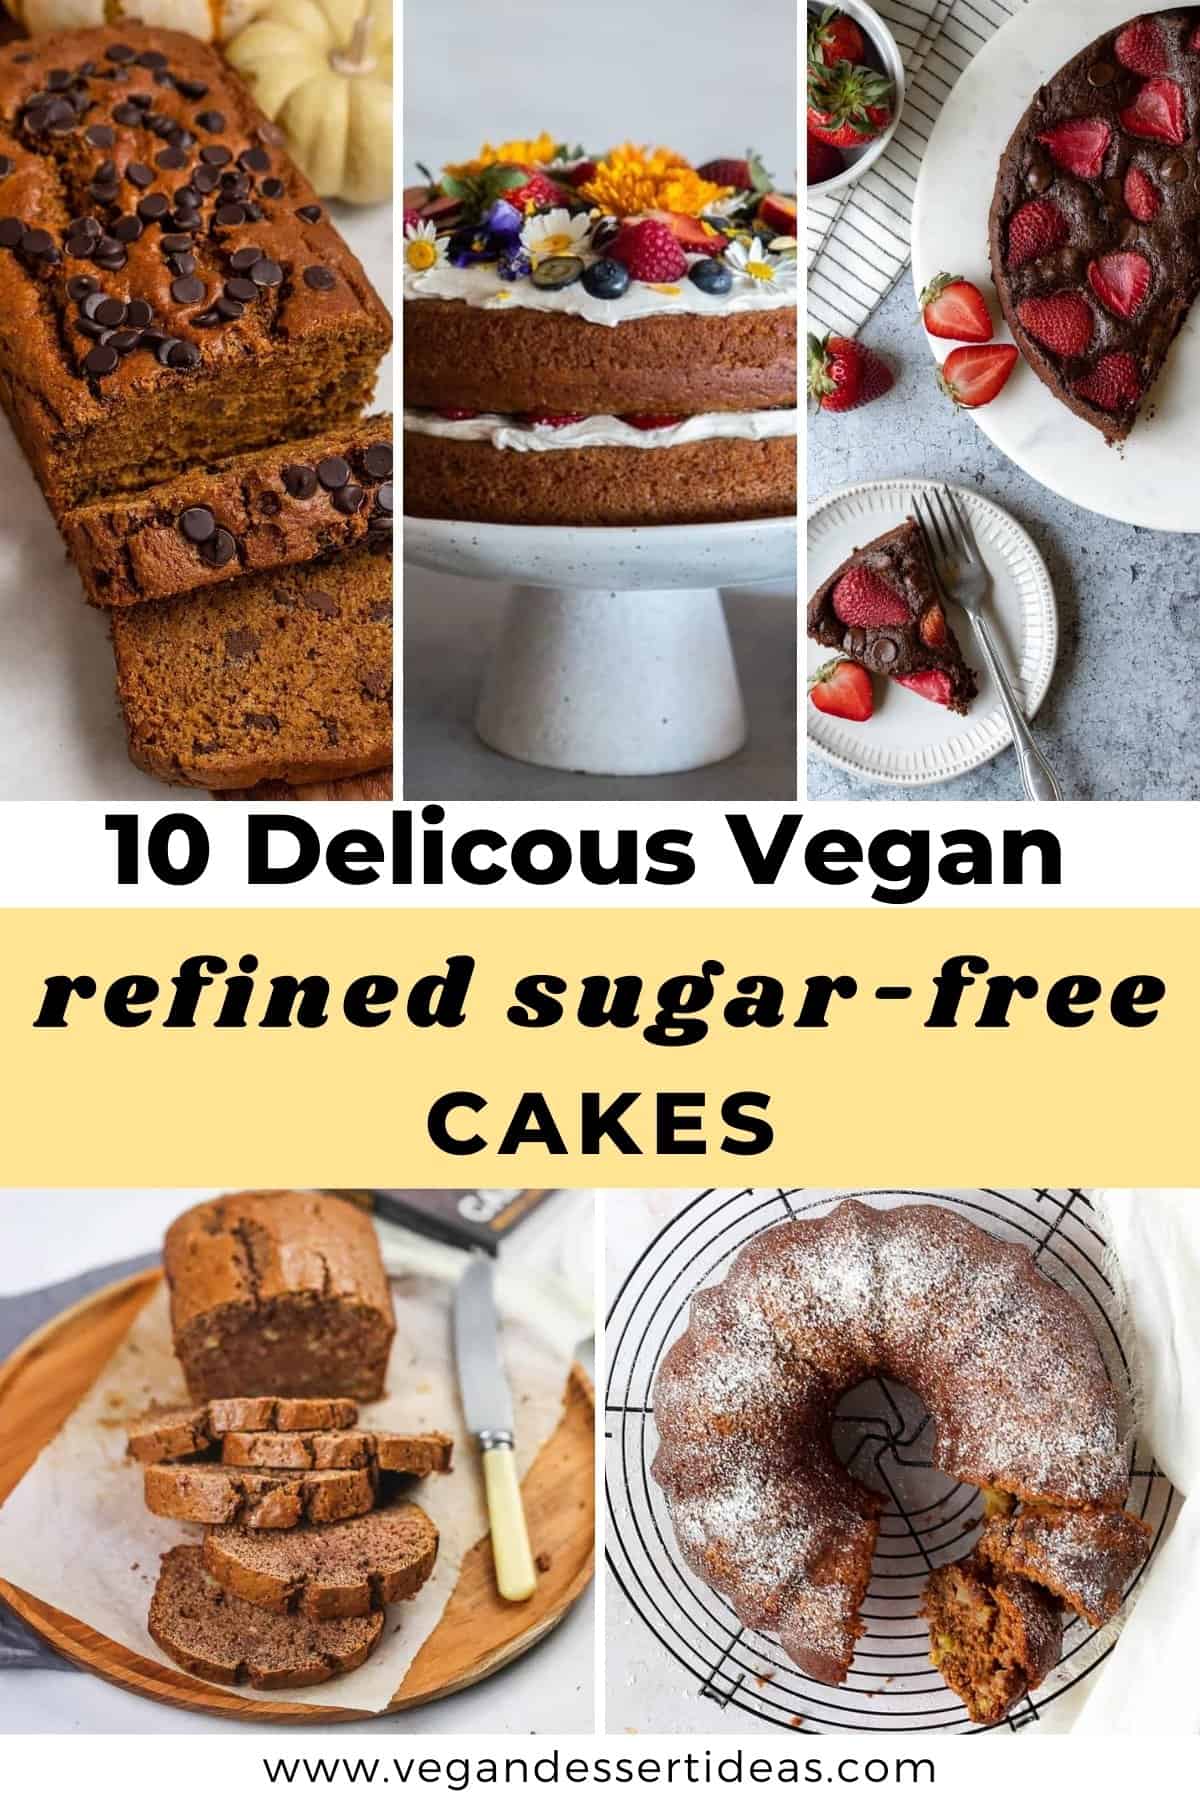 Collage of assorted cakes "10 Delicious Vegan Refined Sugar-Free Cakes"